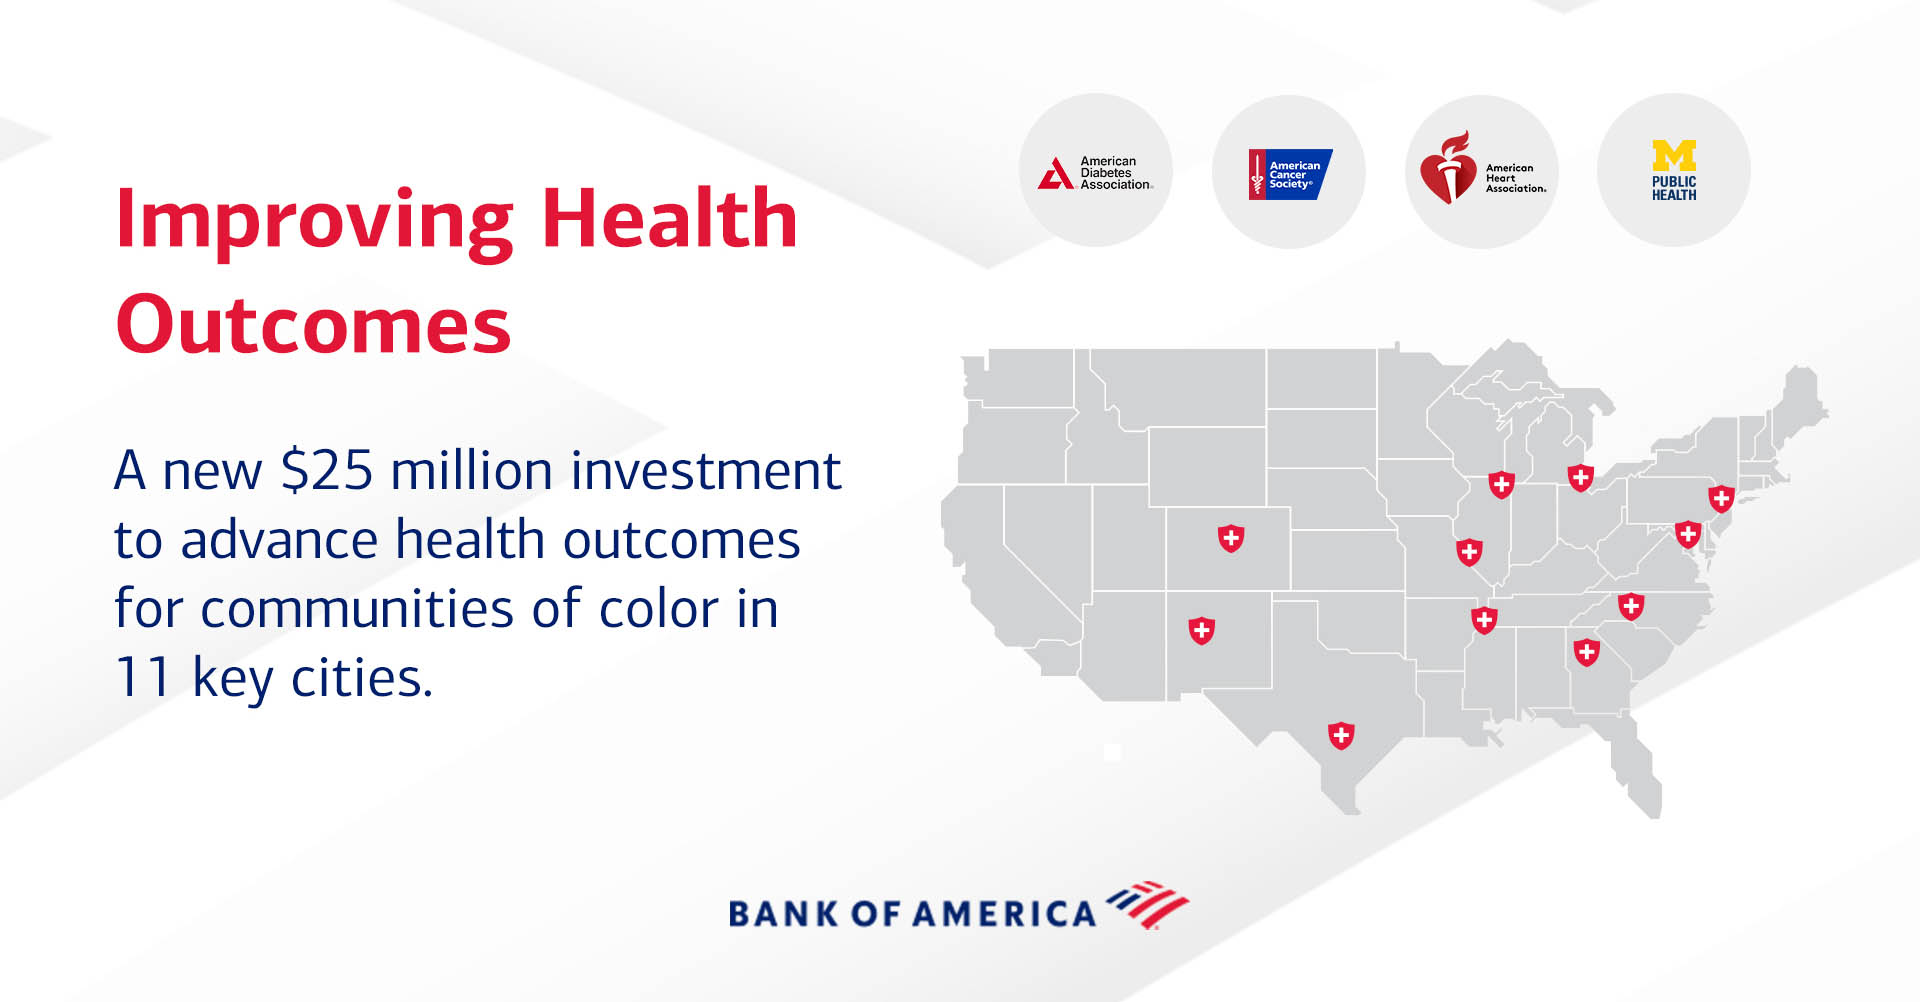 Illustration of the 11 cities across the continental US that are part of the new $25 million investment to advance health and wellness for under-resources communities.